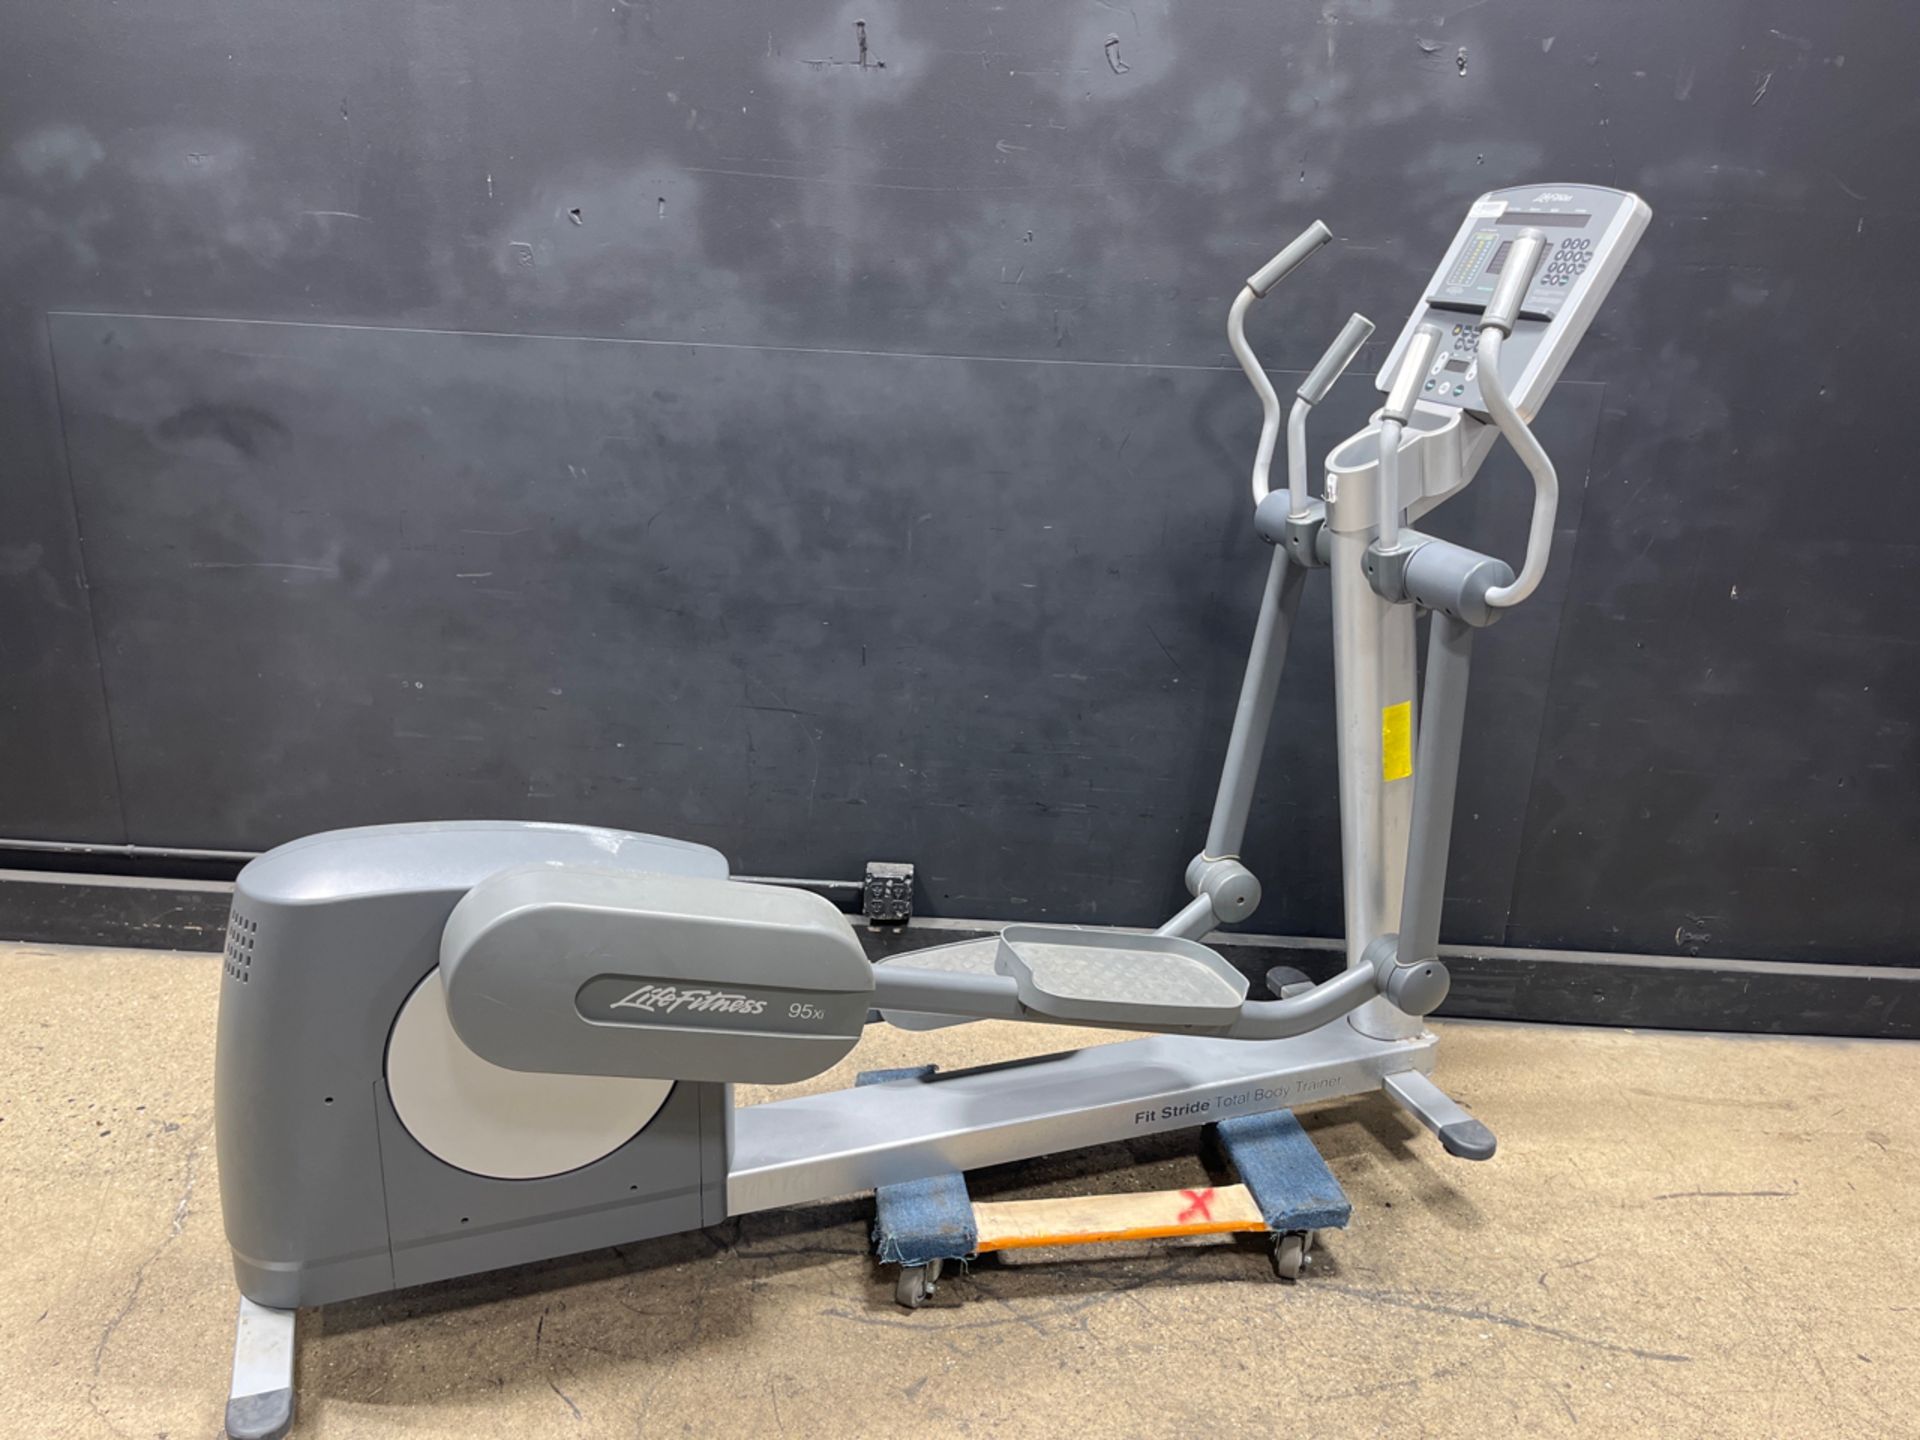 LIFE FITNESS 95XI ELLIPTICAL (LOCATED AT 3325 MOUNT PROSPECT ROAD, FRANKLIN PARK, IL, 60131) - Image 2 of 3